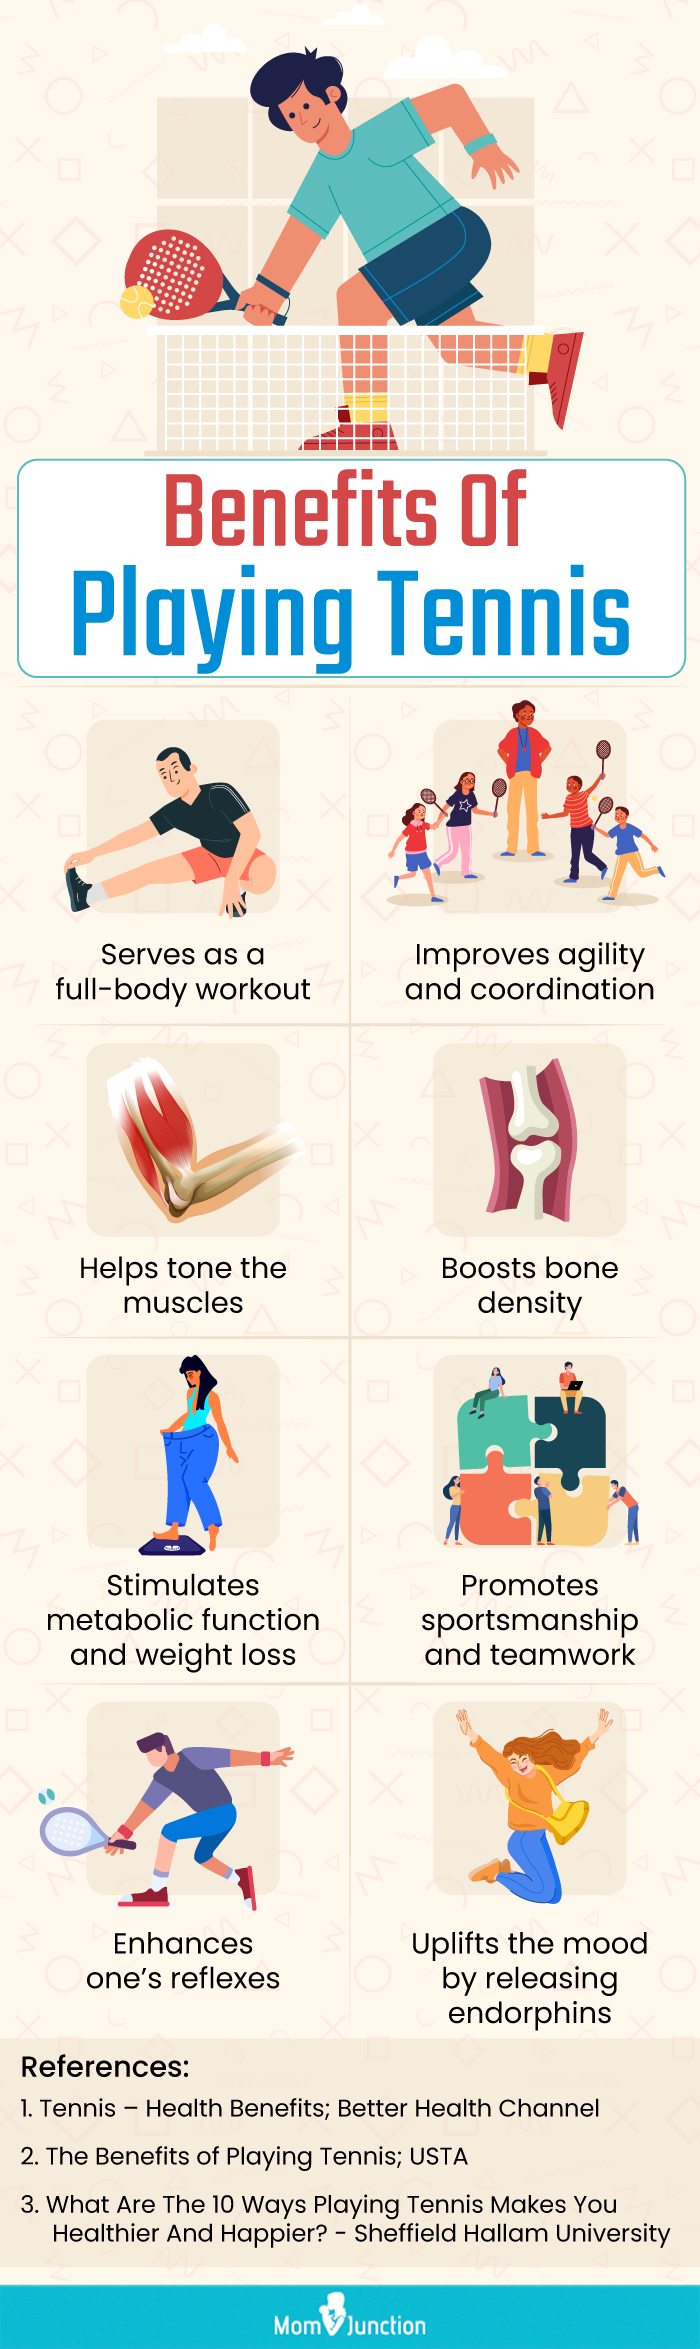 Benefits Of Playing Tennis (infographic)